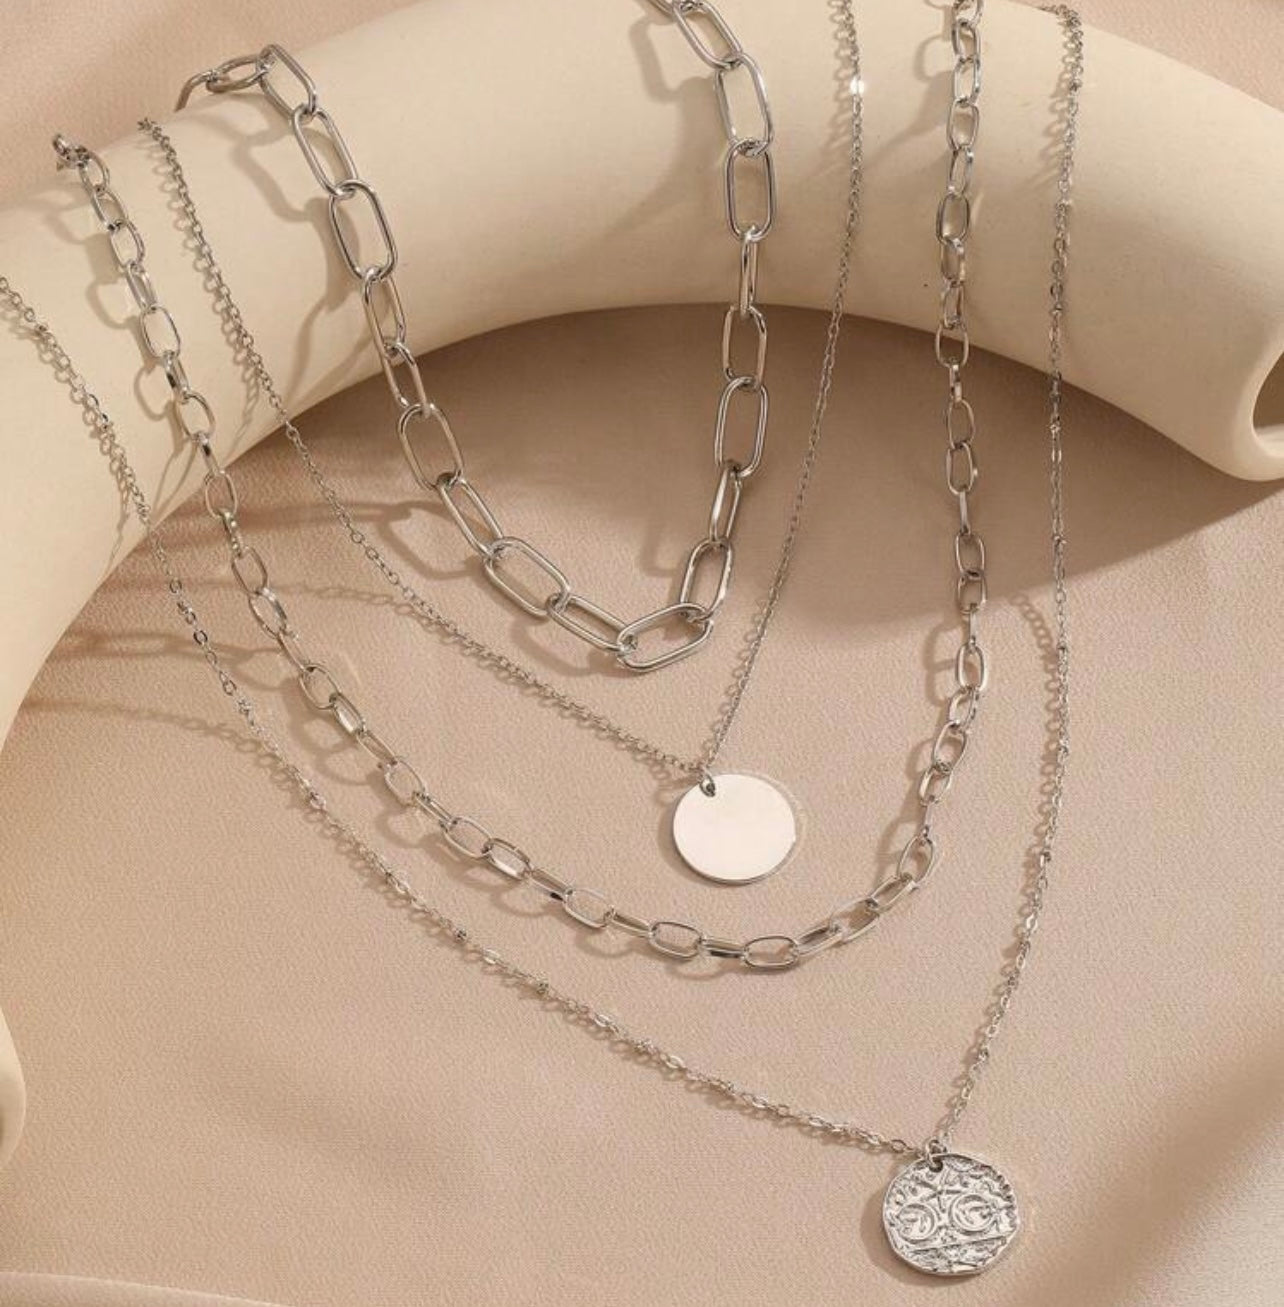 Beautiful Silver Layered Necklace